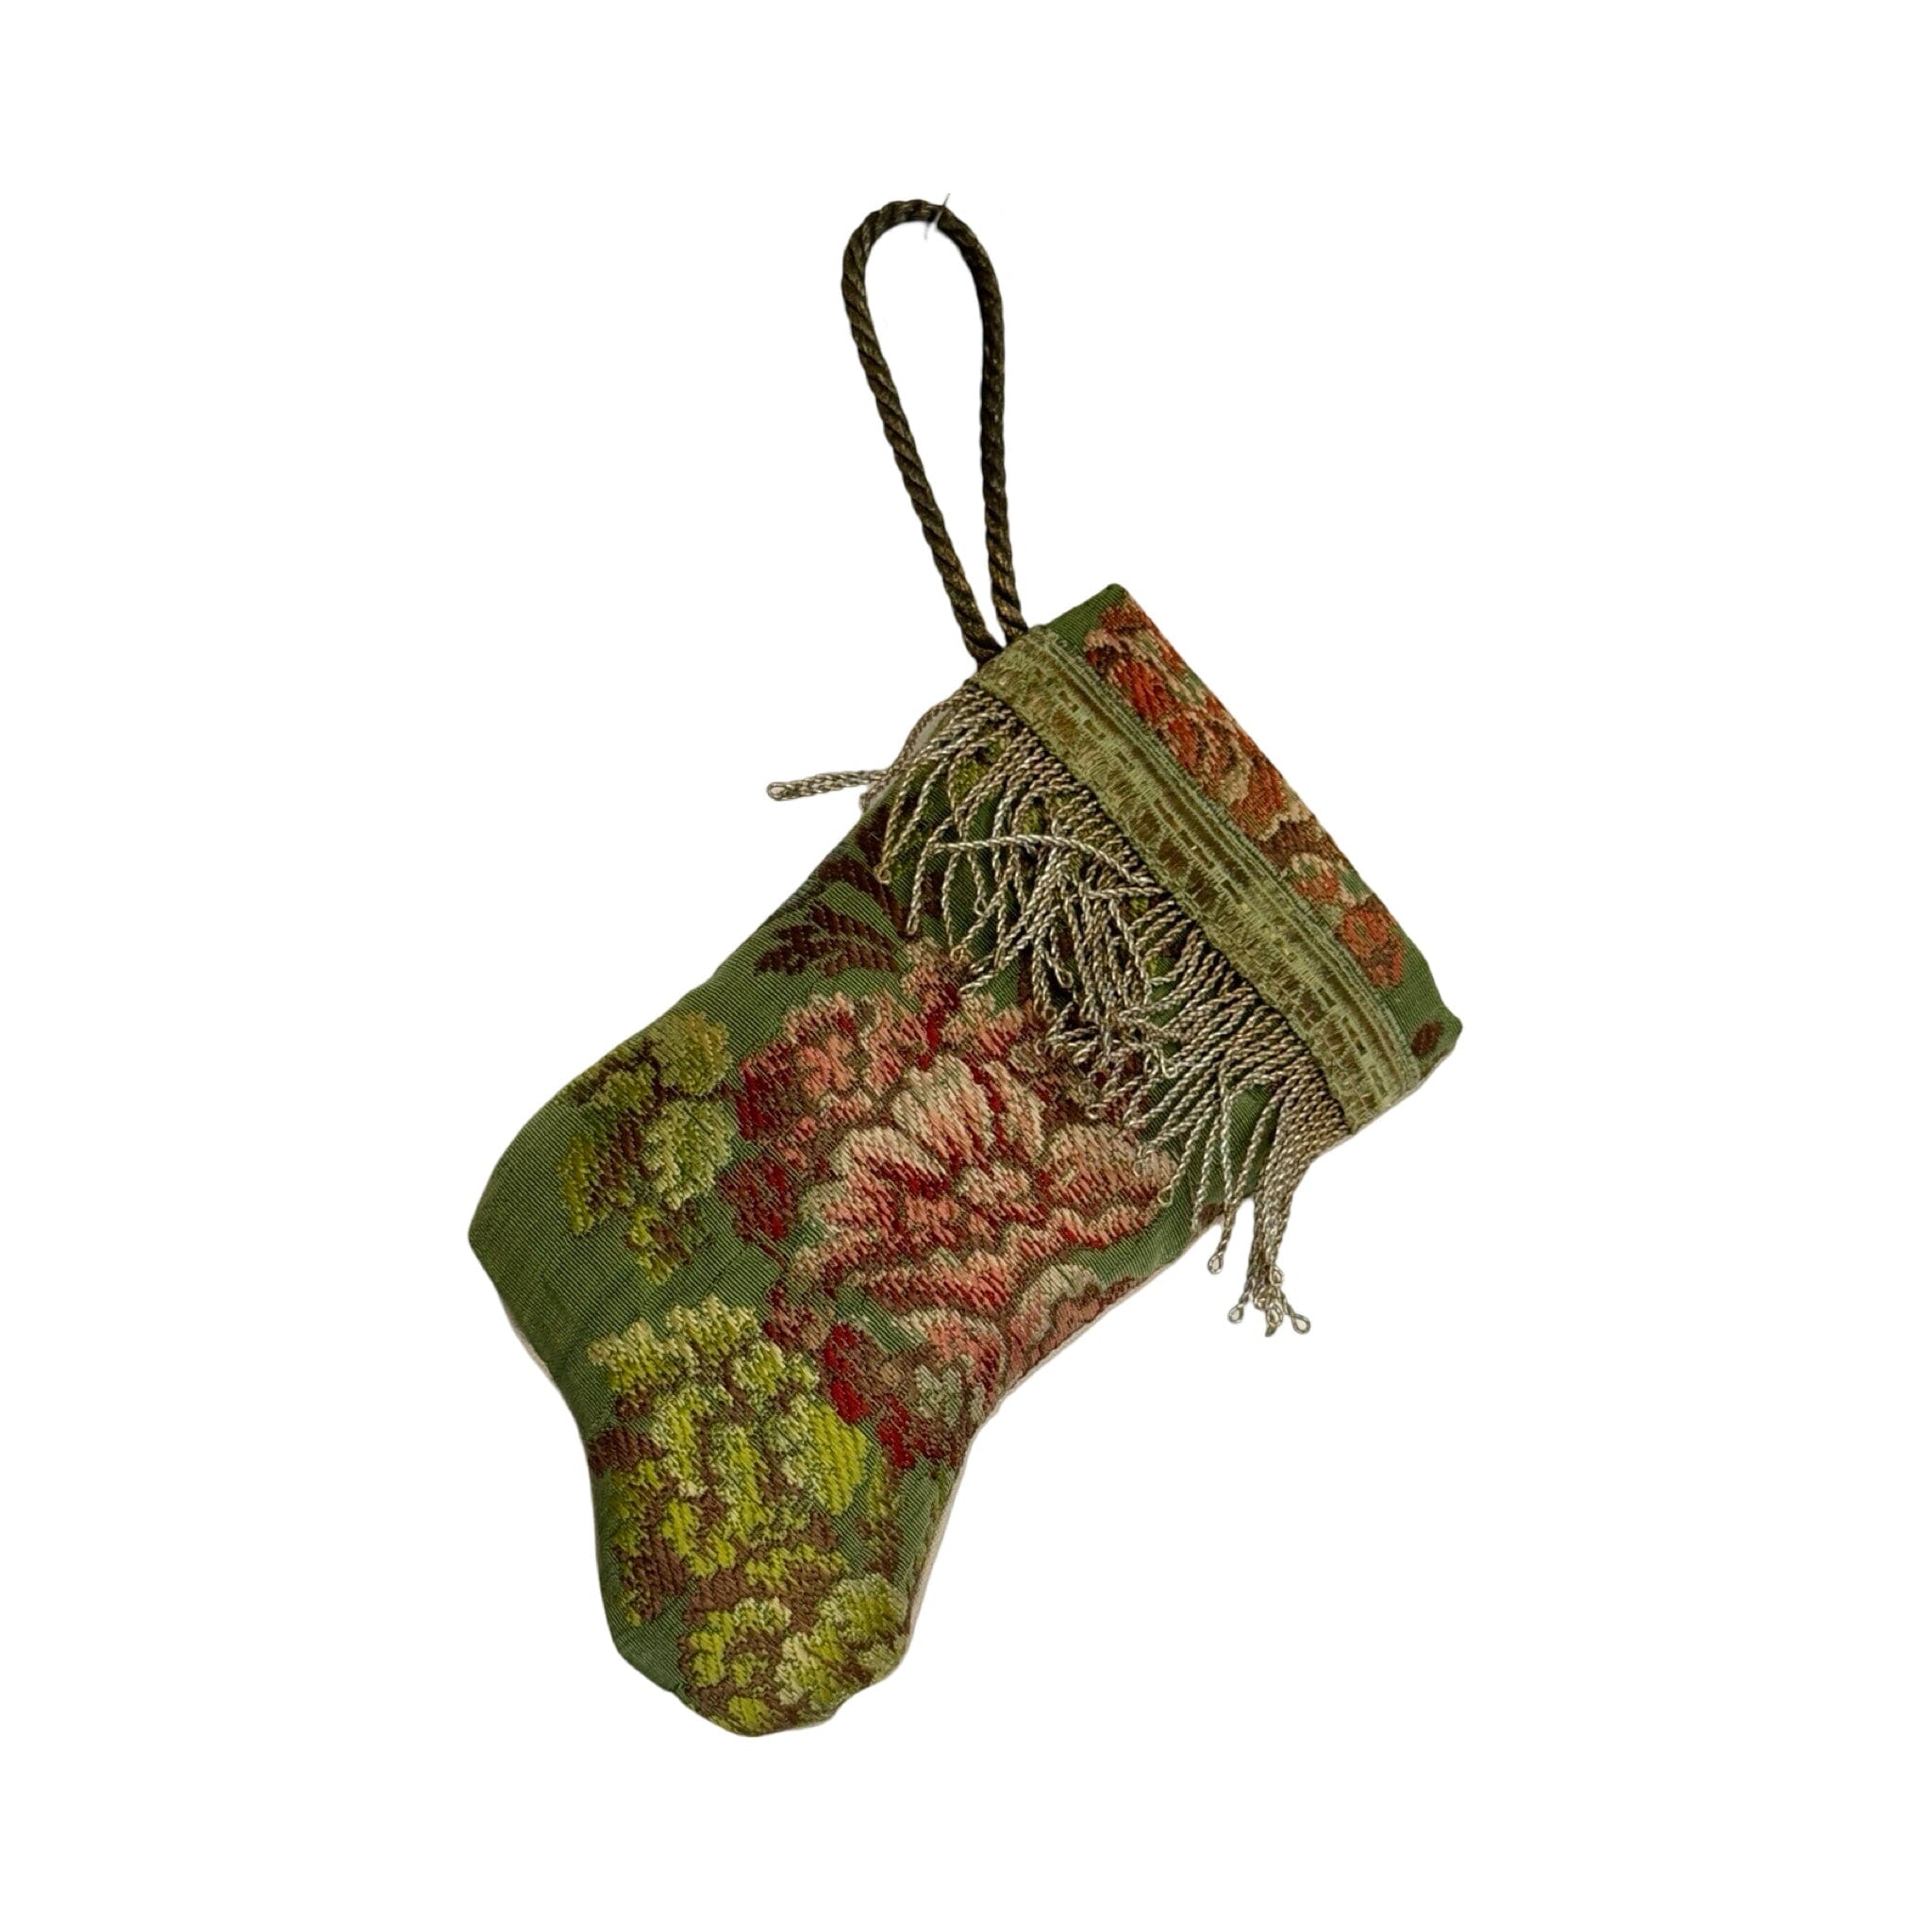 Handmade Mini Stocking Made From Vintage Fabric and Trims- Green Floral Ornament B. Viz Design A 